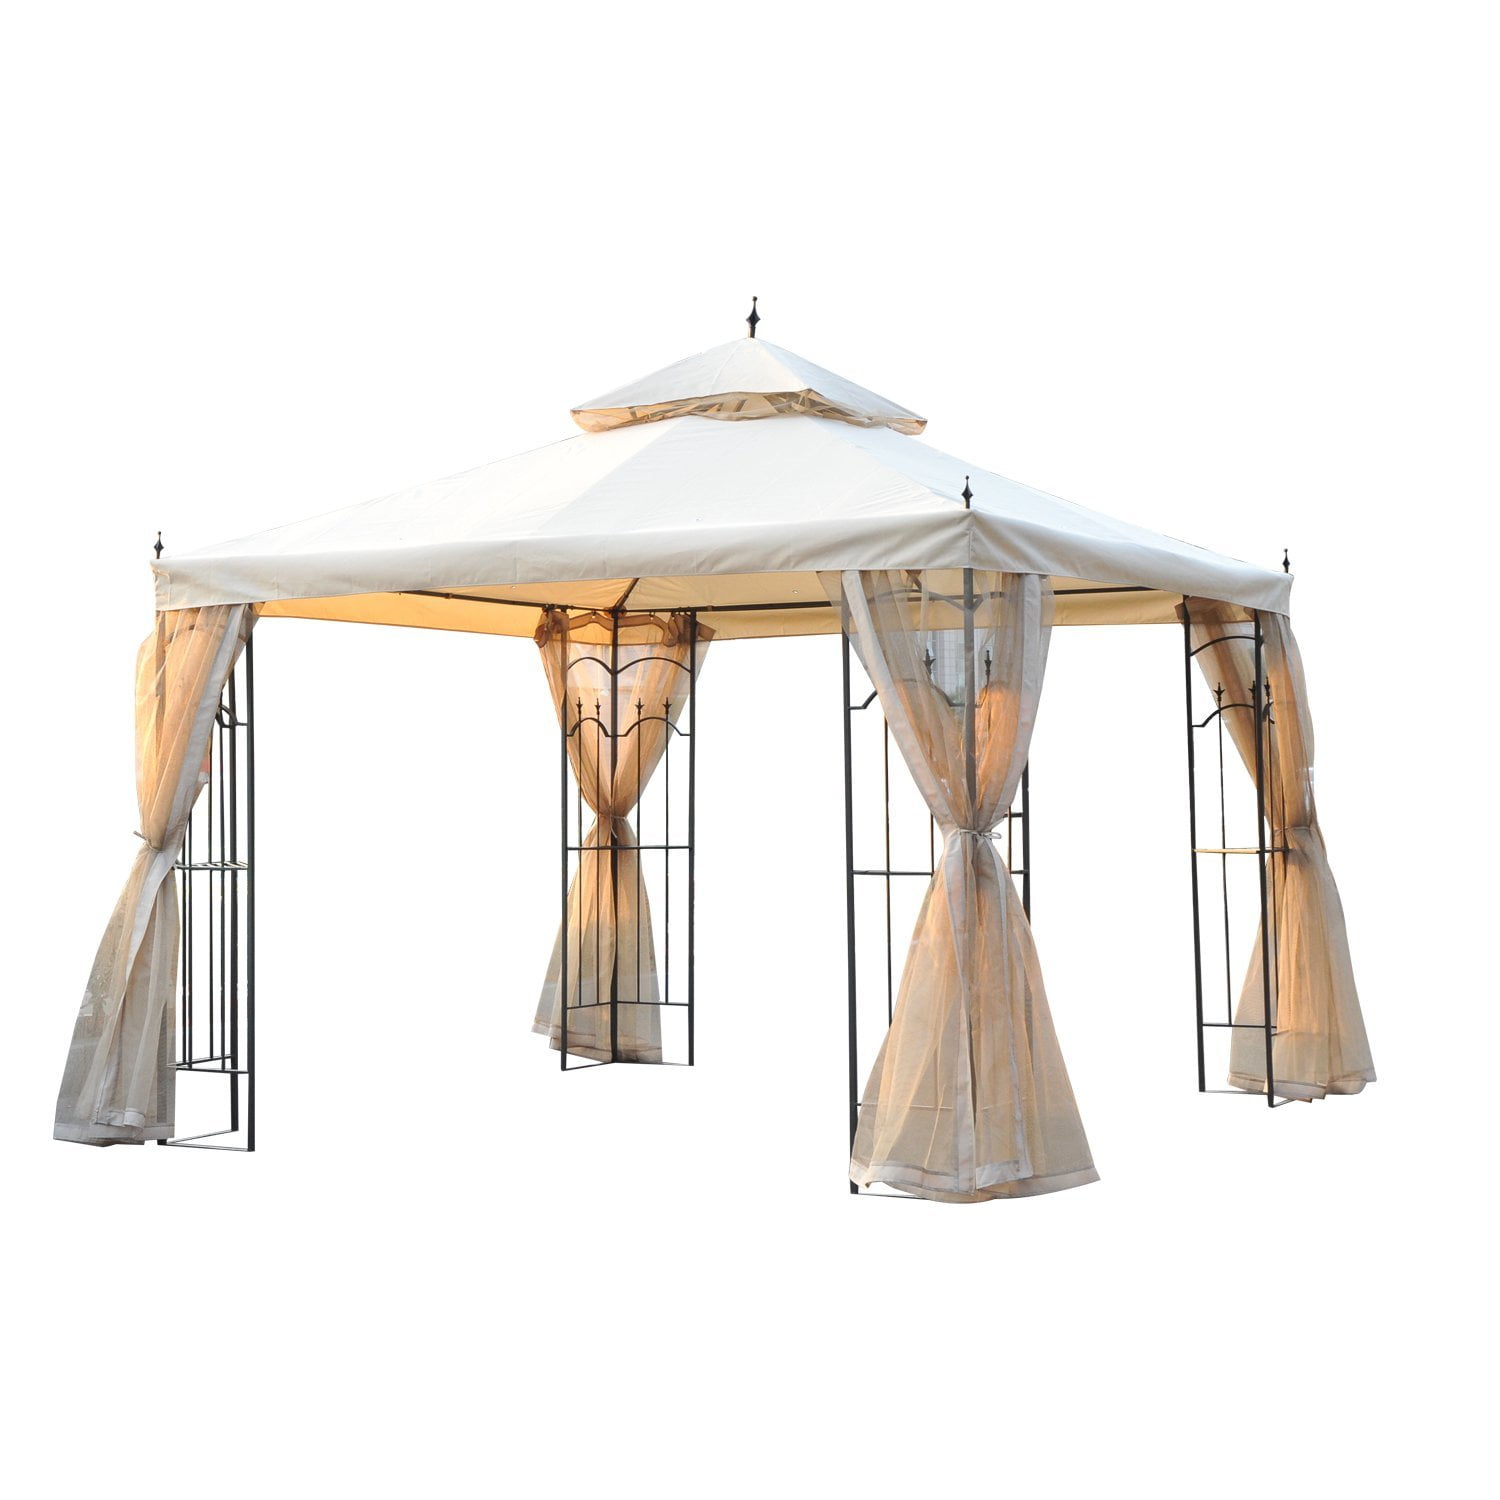 Outsunny 3x3M Metal Gazebo Outdoor Party Tent Shelter Garden Canopy Beige 